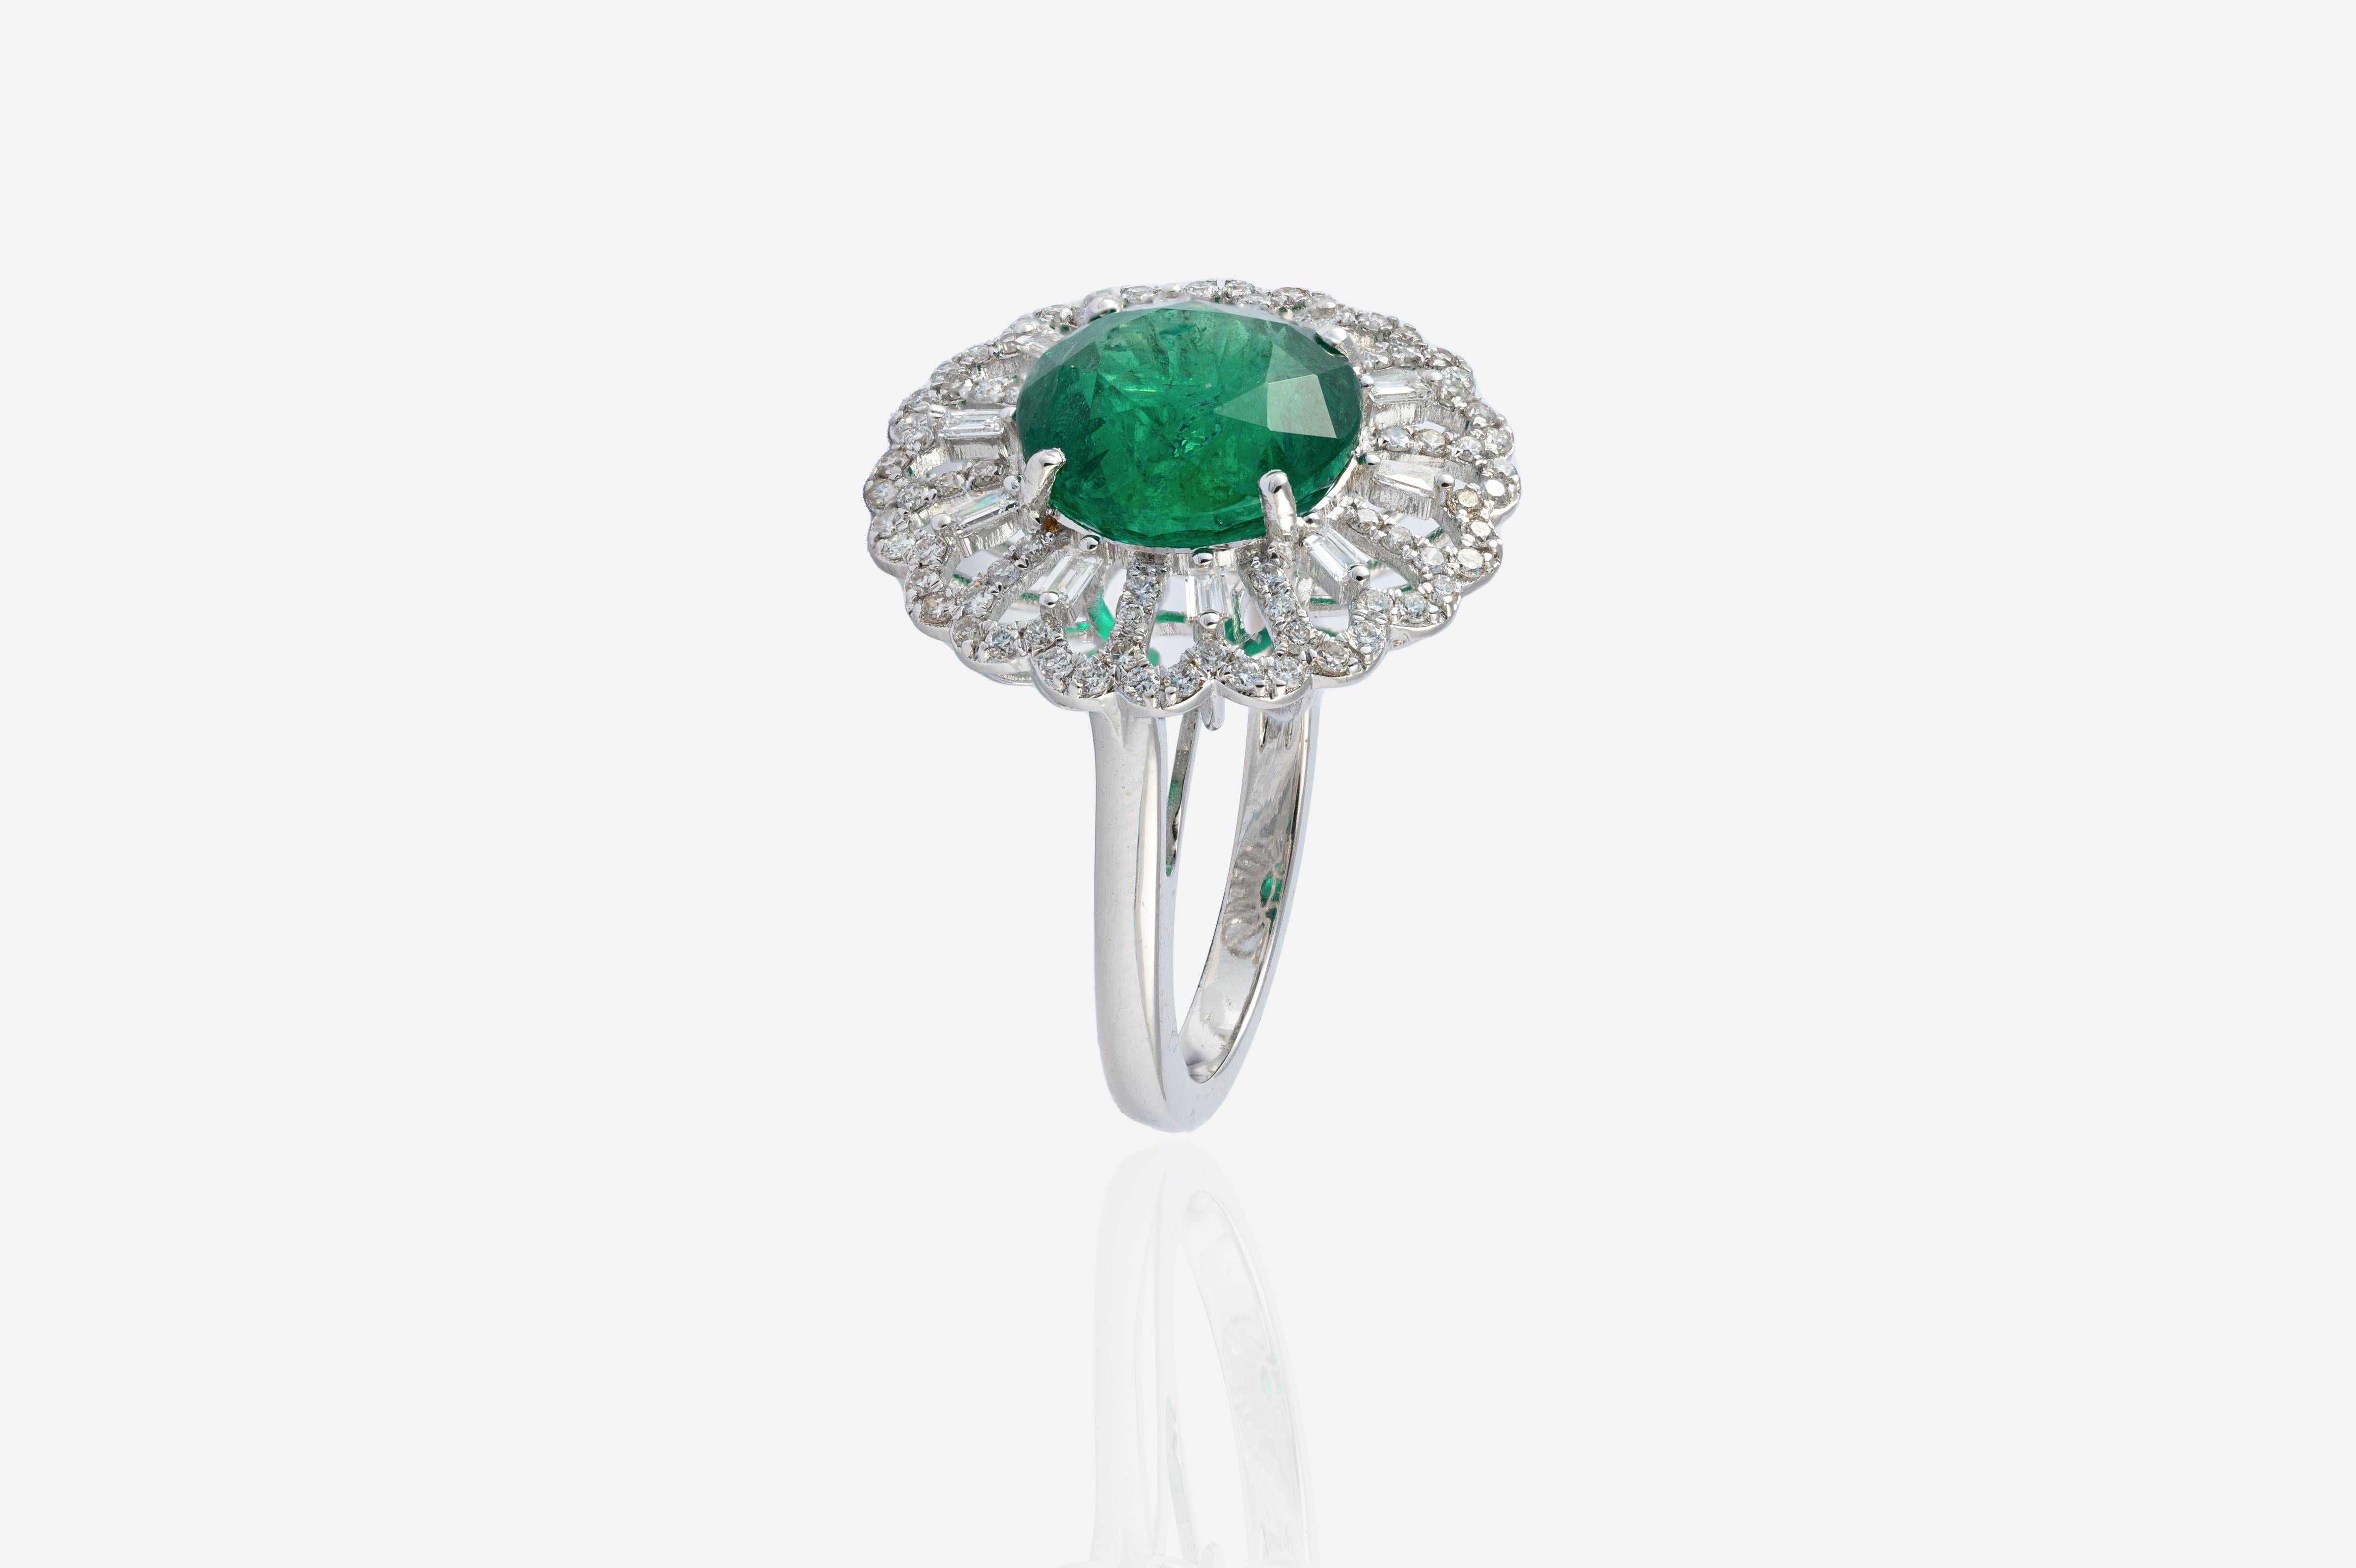 this is a beautiful natural Zambian Emerald ring for daily wear. the Emerald is of very high quality and diamonds are very good ( vsi ) quality and G colour

Emerald: 5.71 cts
diamond : 0.77 cts
gold : 4.98 g

Its very hard to capture the true color